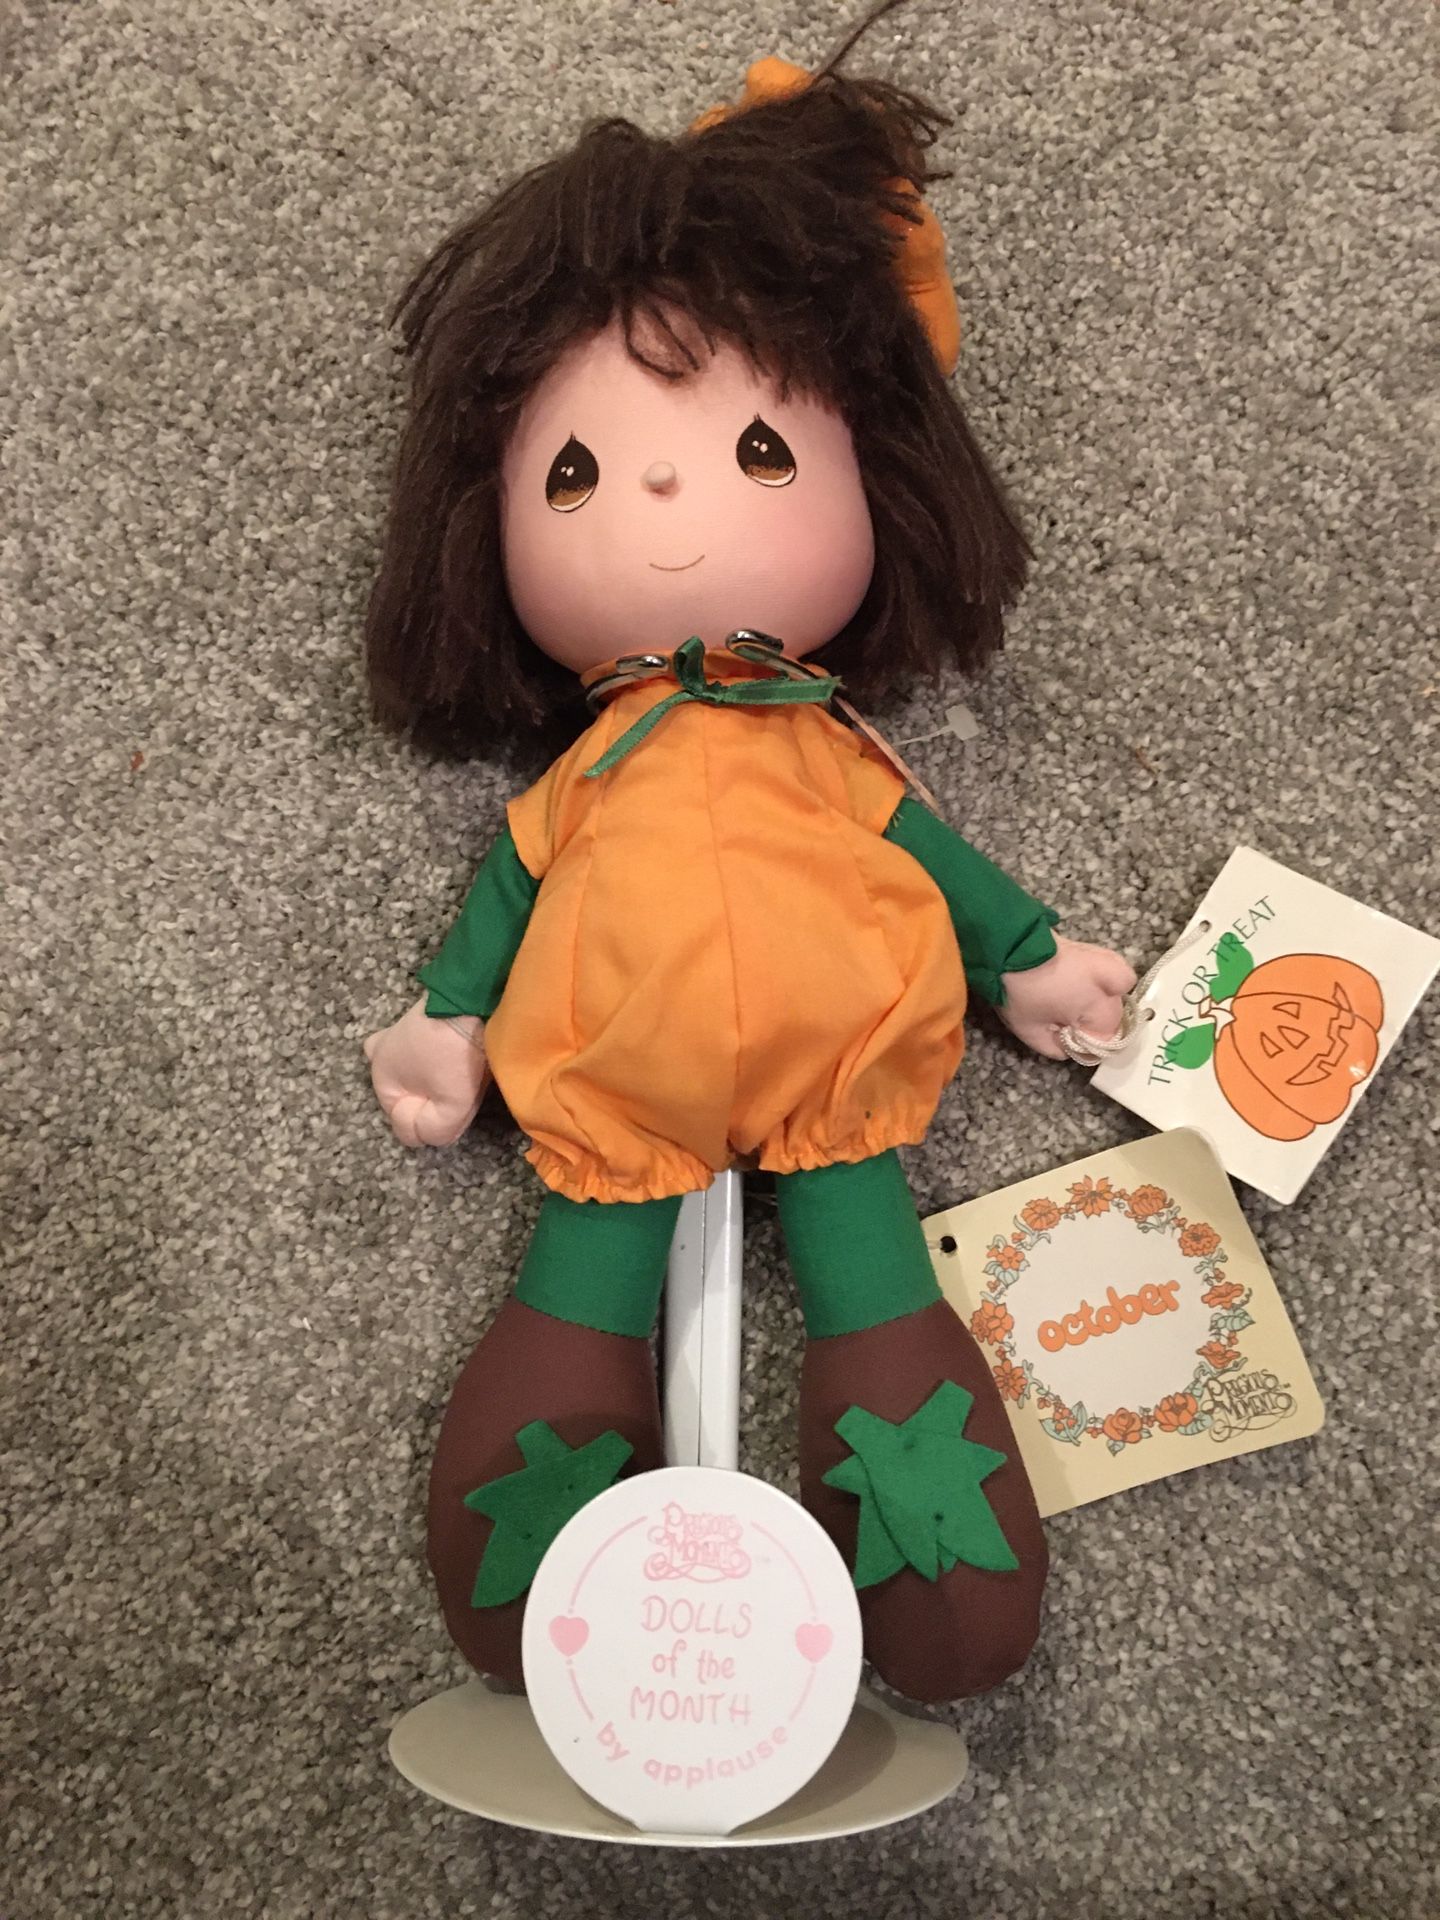 Precious Moments doll of the month October